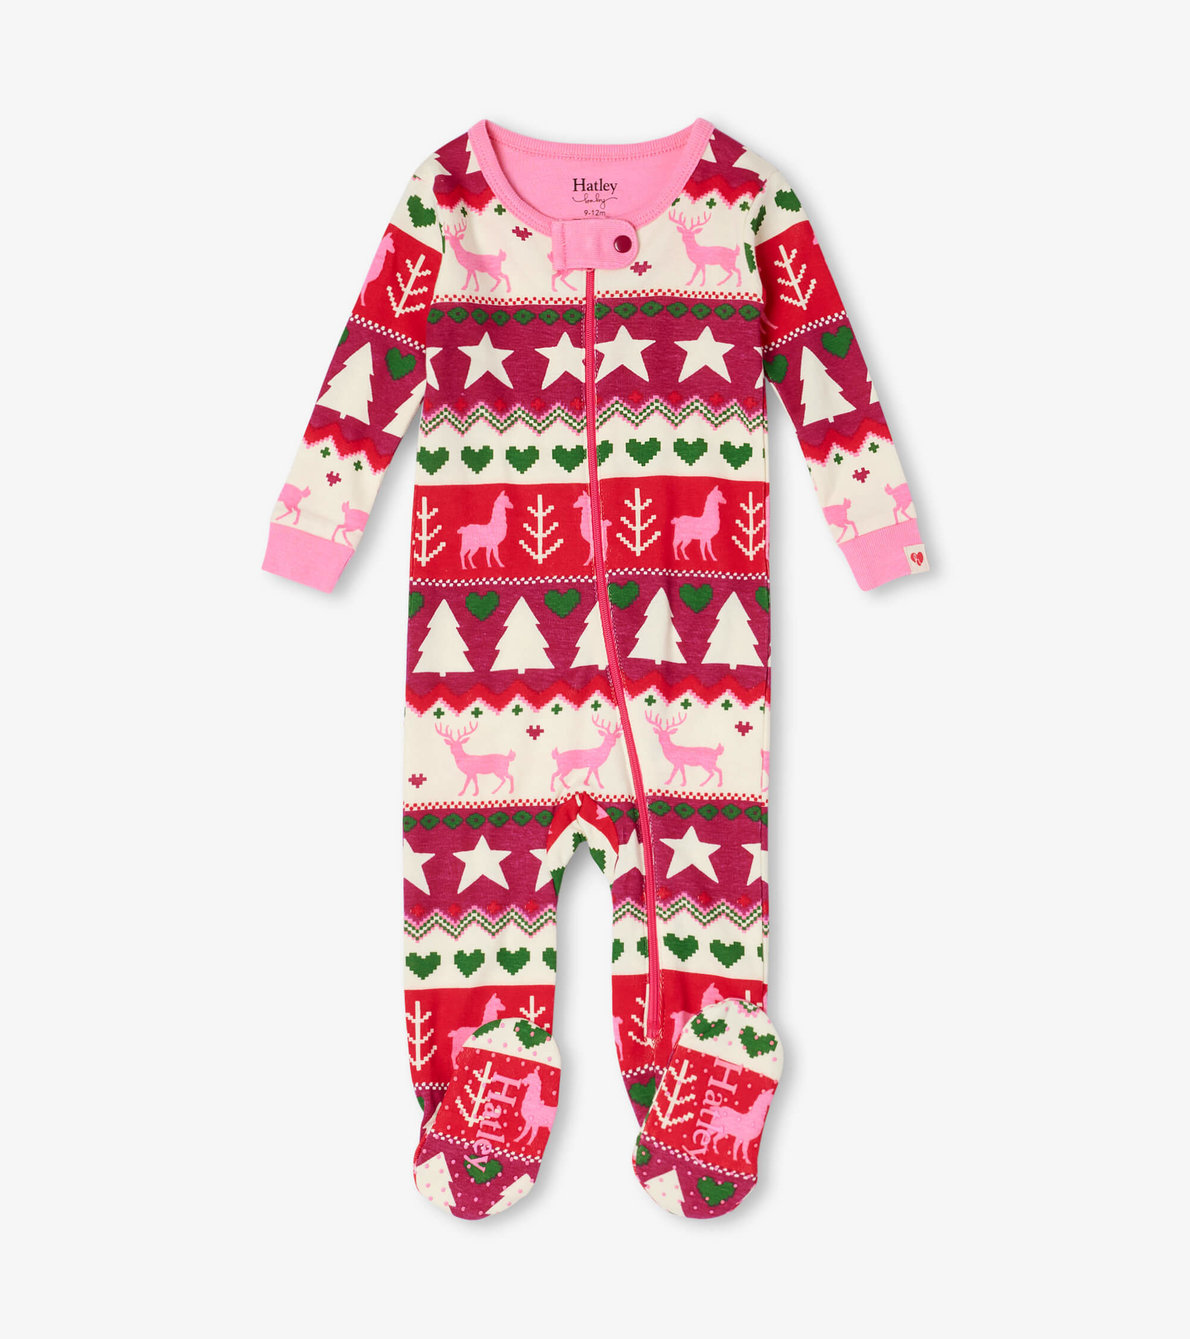 View larger image of Holiday Fair Isle Organic Cotton Footed Sleeper